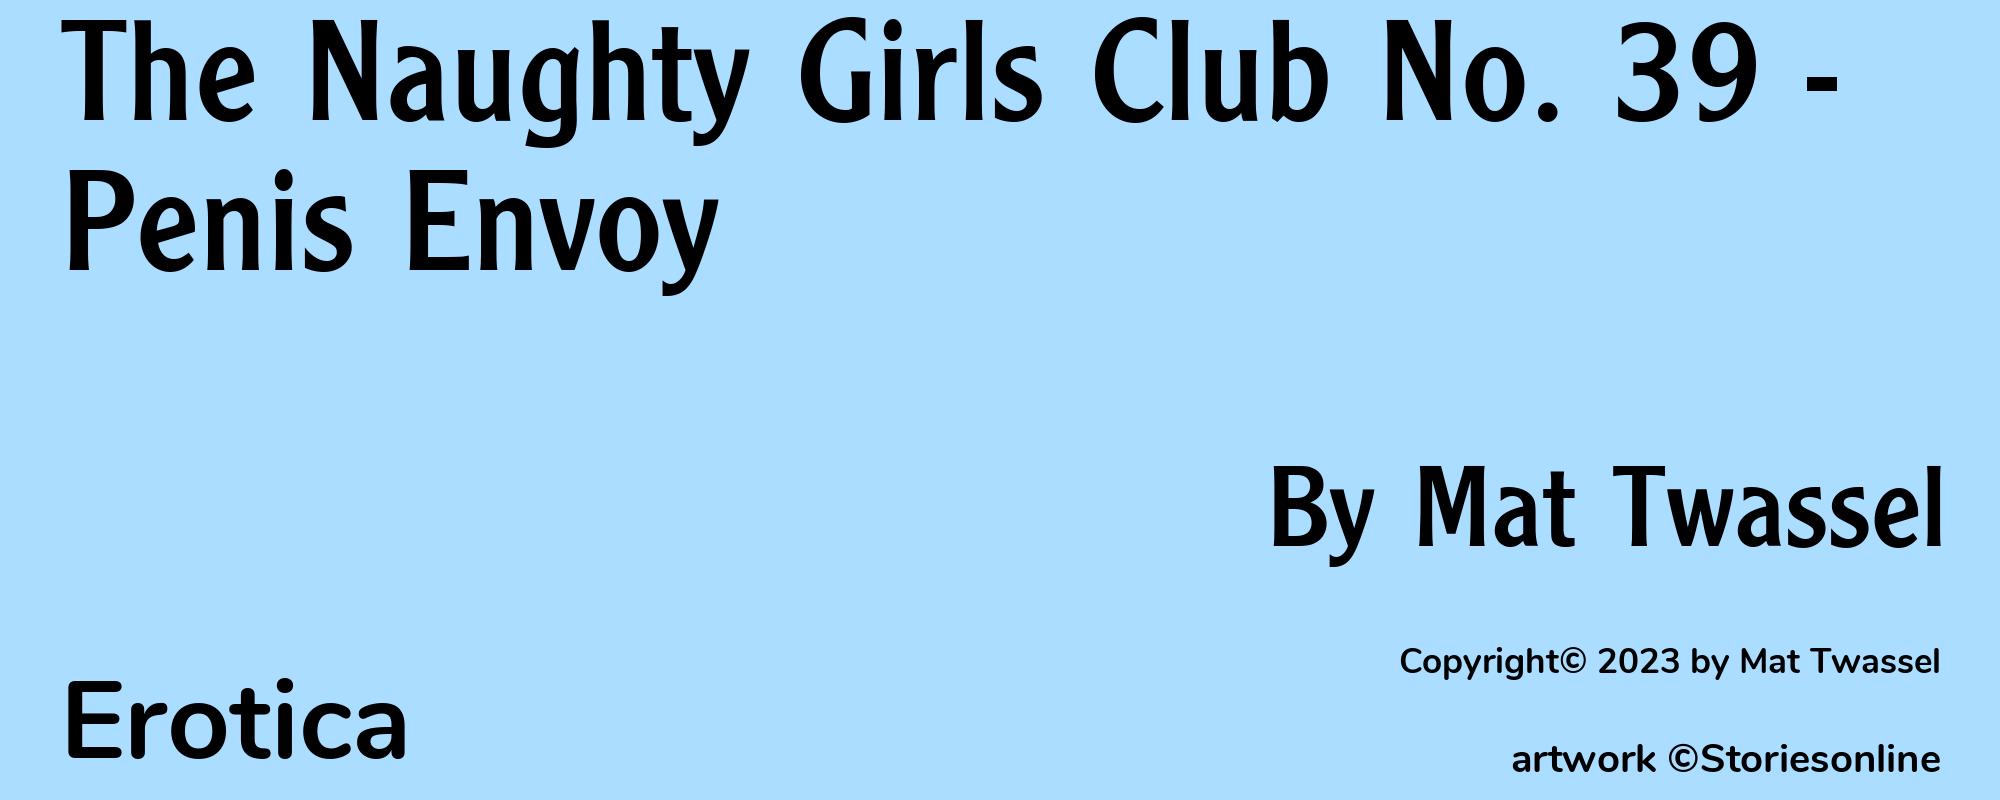 The Naughty Girls Club No. 39 - Penis Envoy - Cover